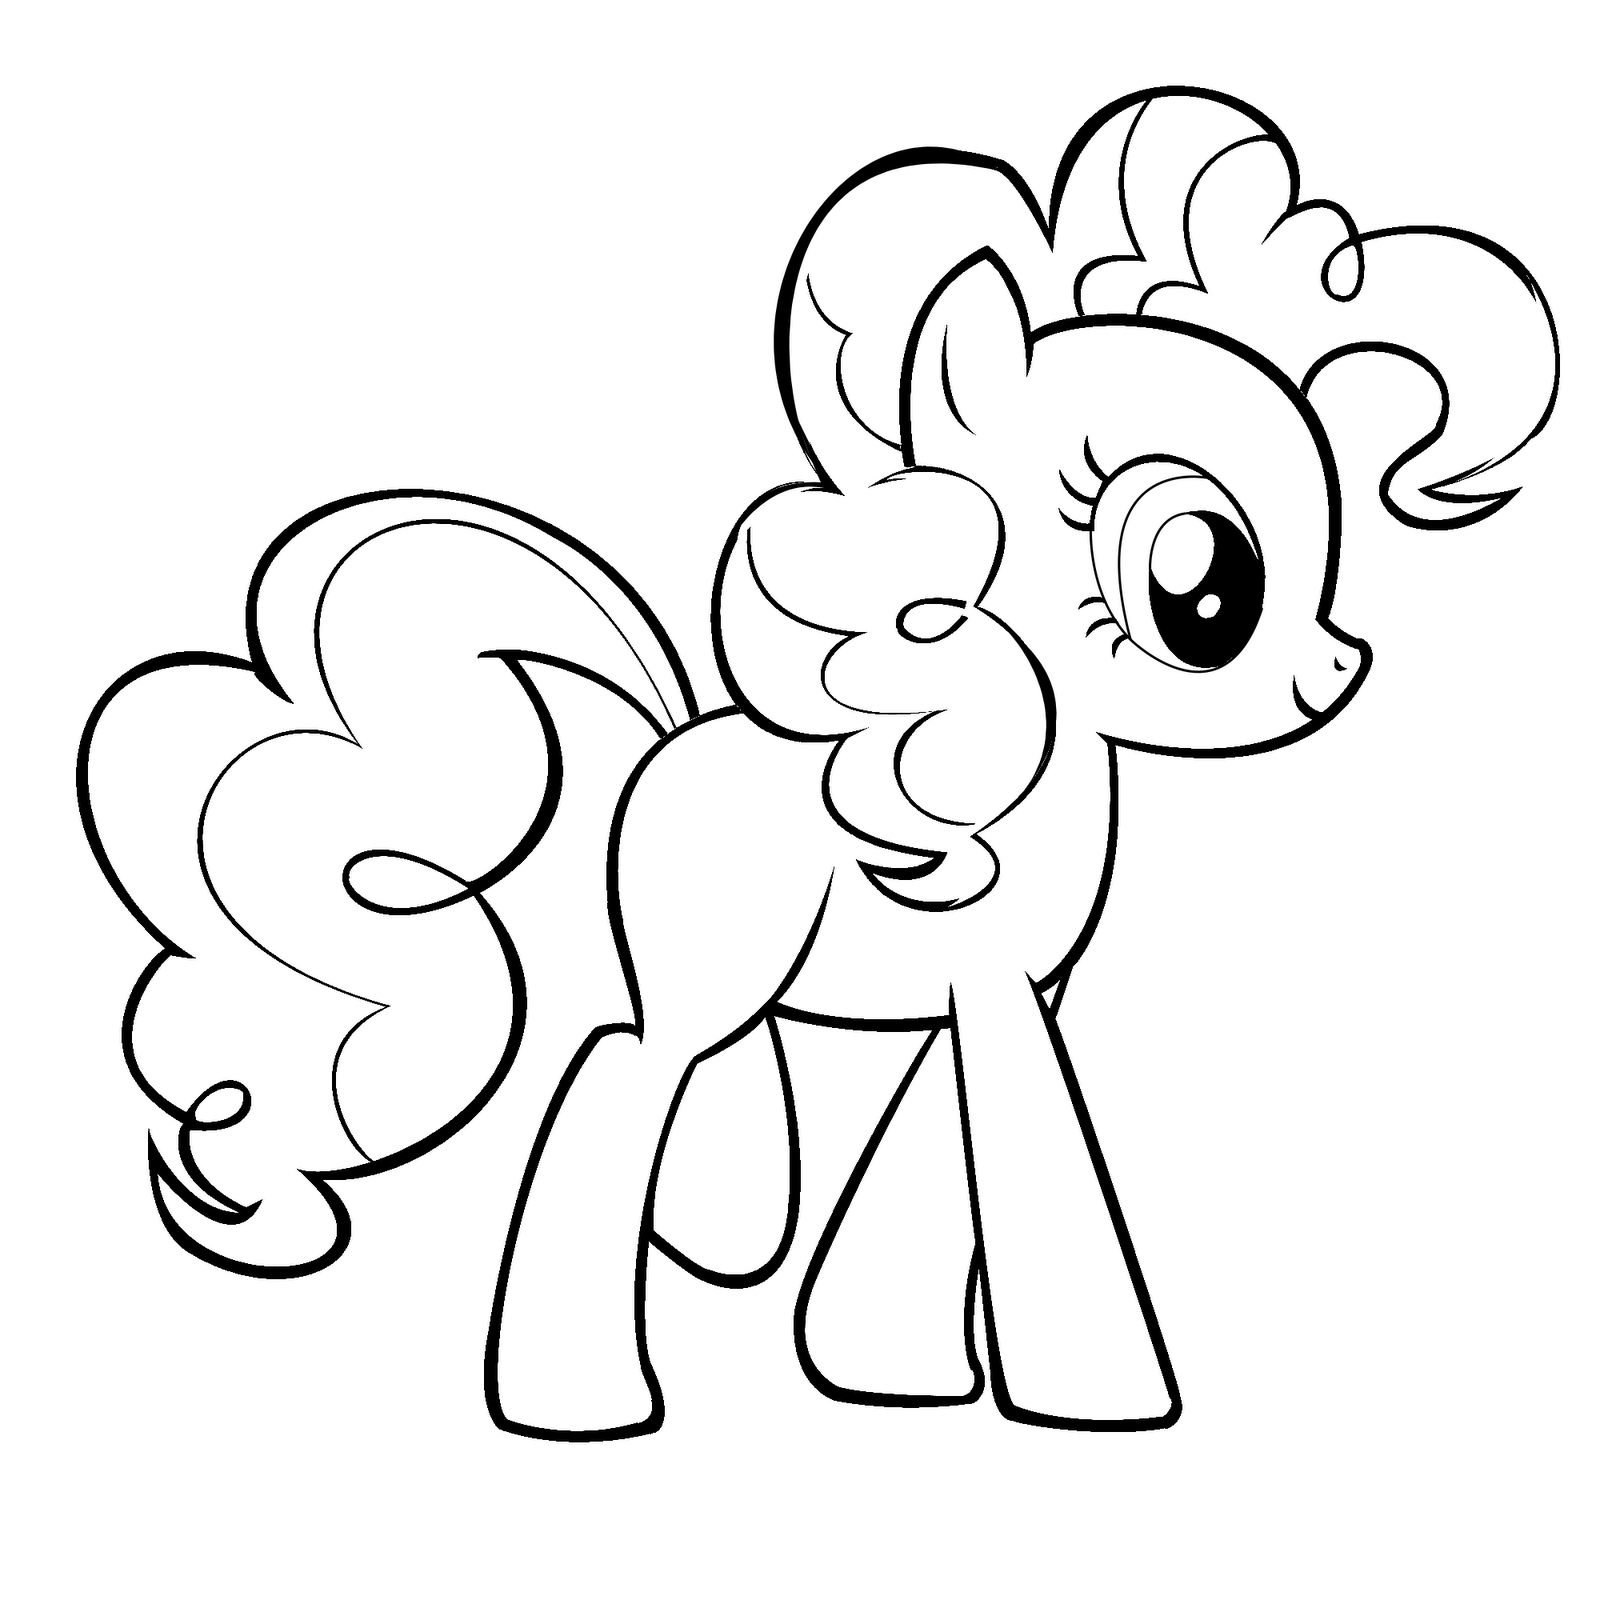 pinkie pie to color coloring page Pie coloring pinkie clipart pages